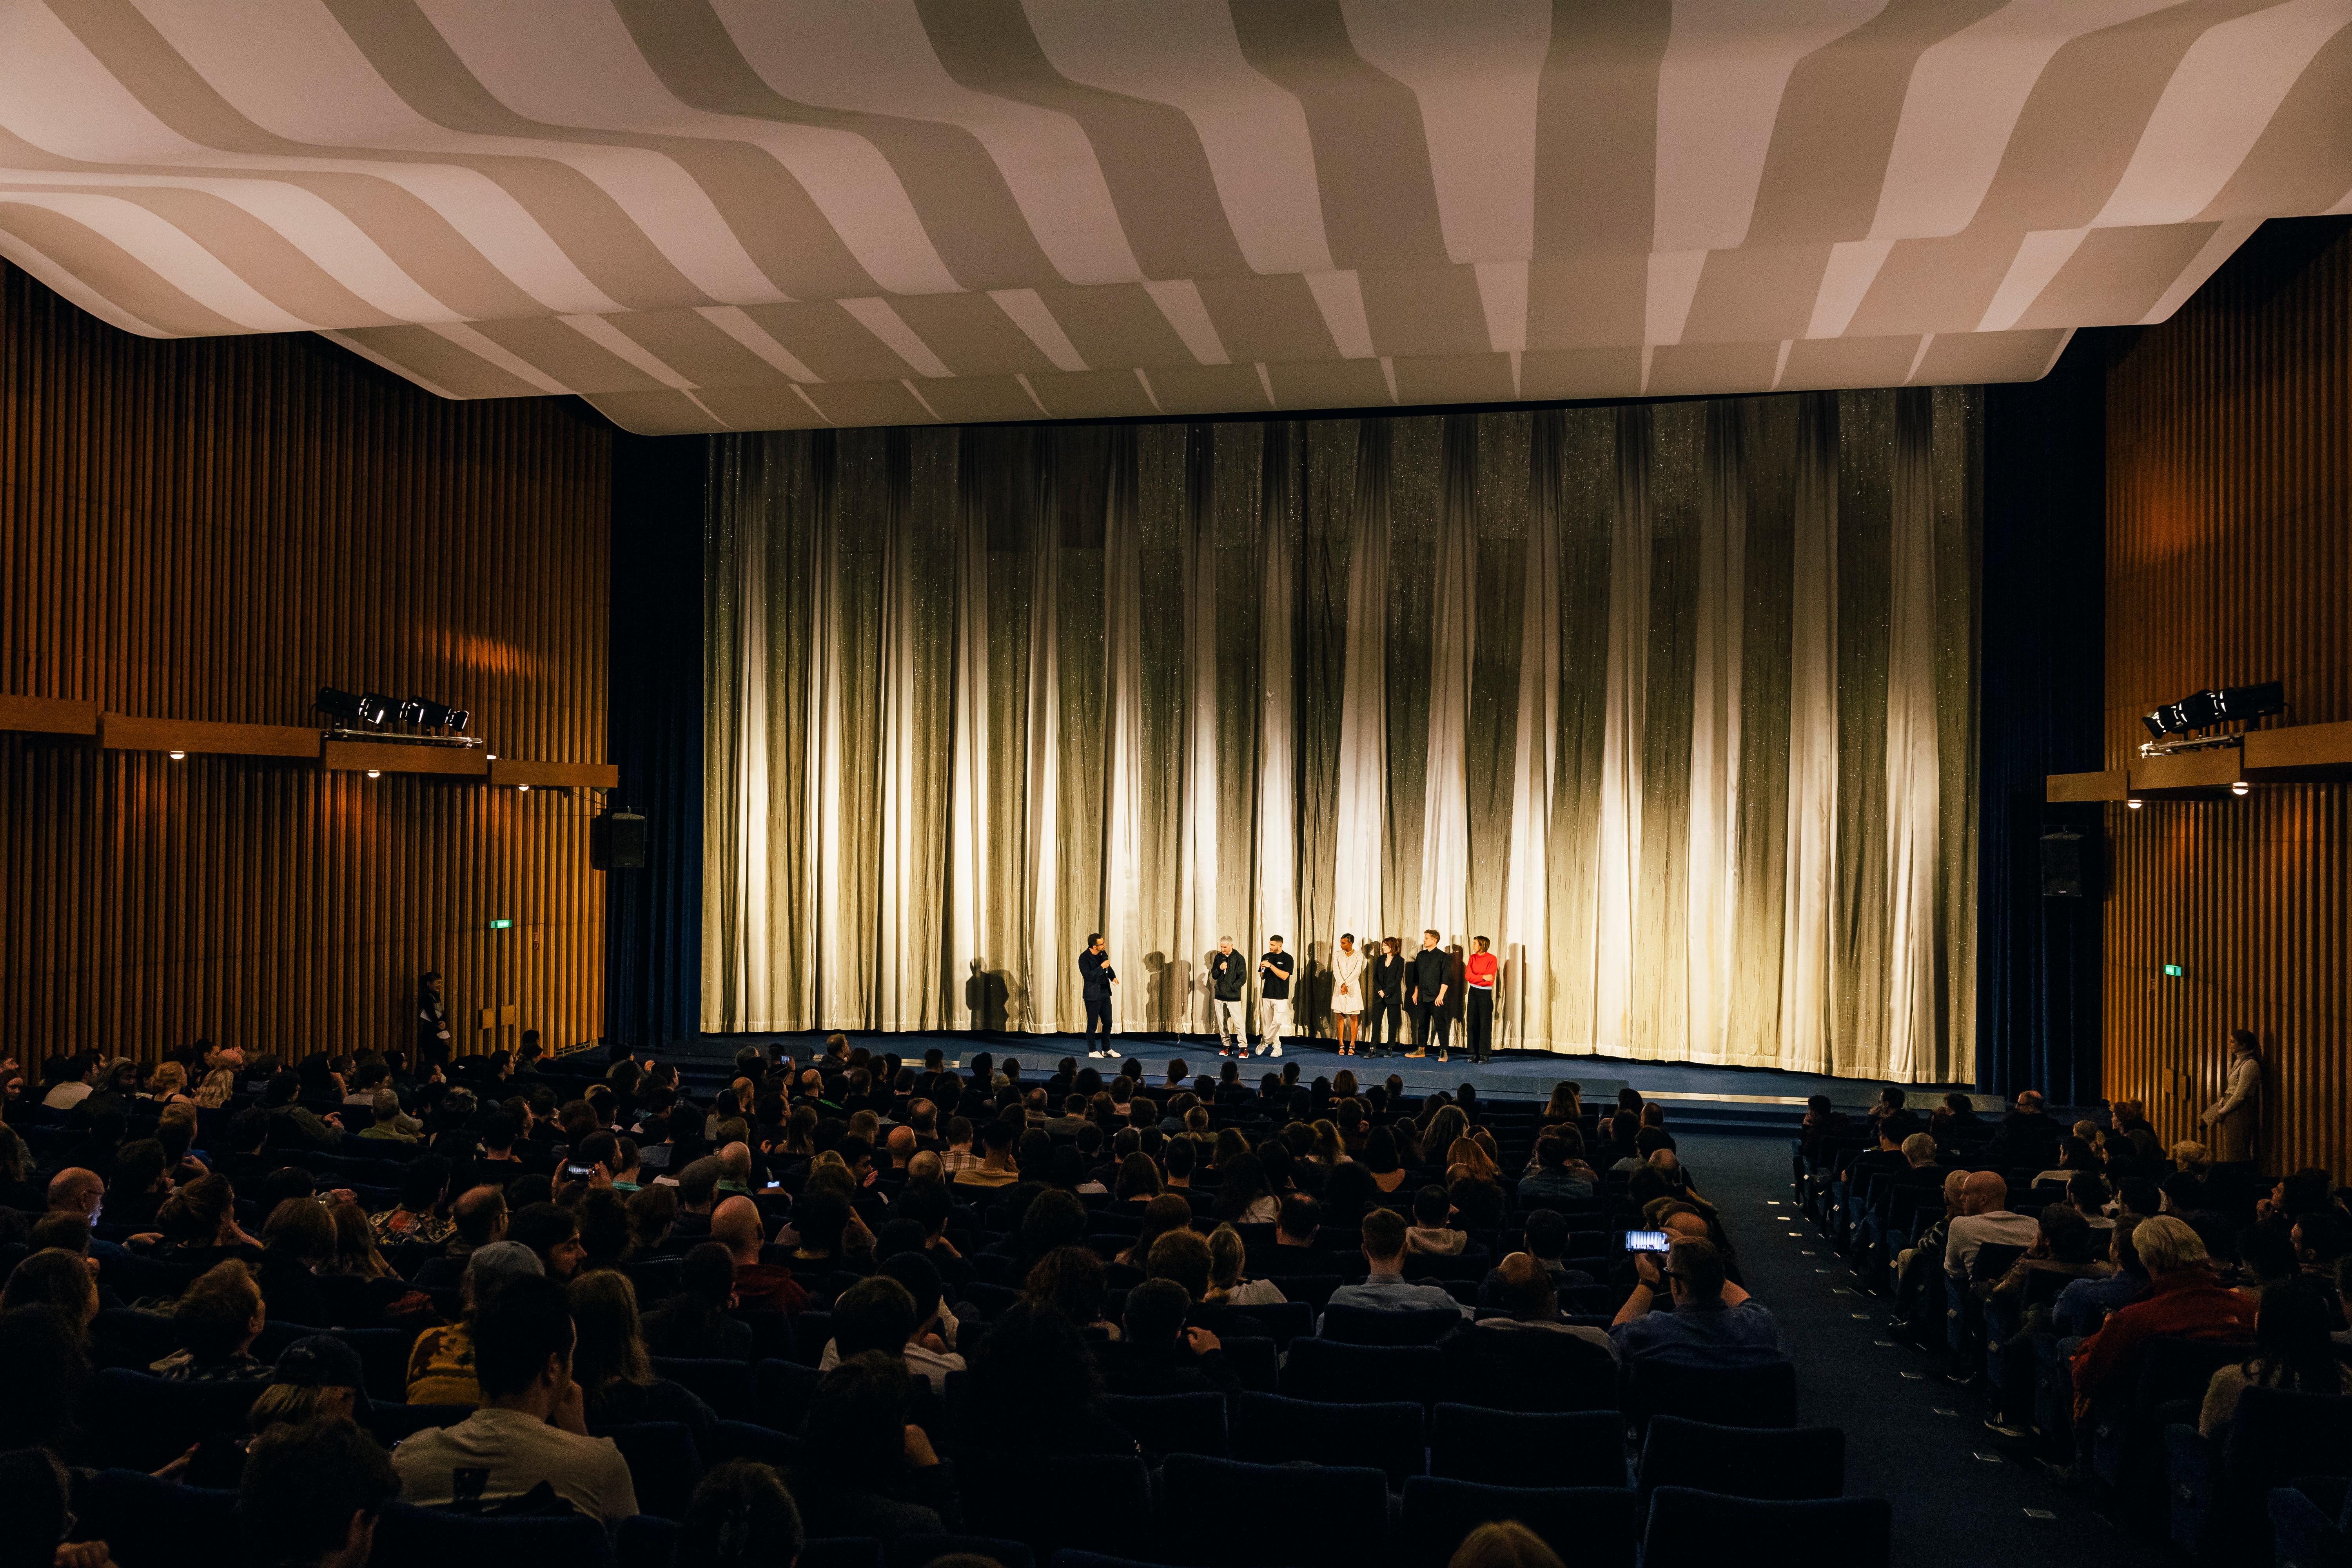 The cinema hall at Kino International with audience. On stage are the directors Danny and Michael Philippou, the actresses Alexandra Jensen and Sophie Wilde and the programmer Sergio Fant as a member of the selection committee.